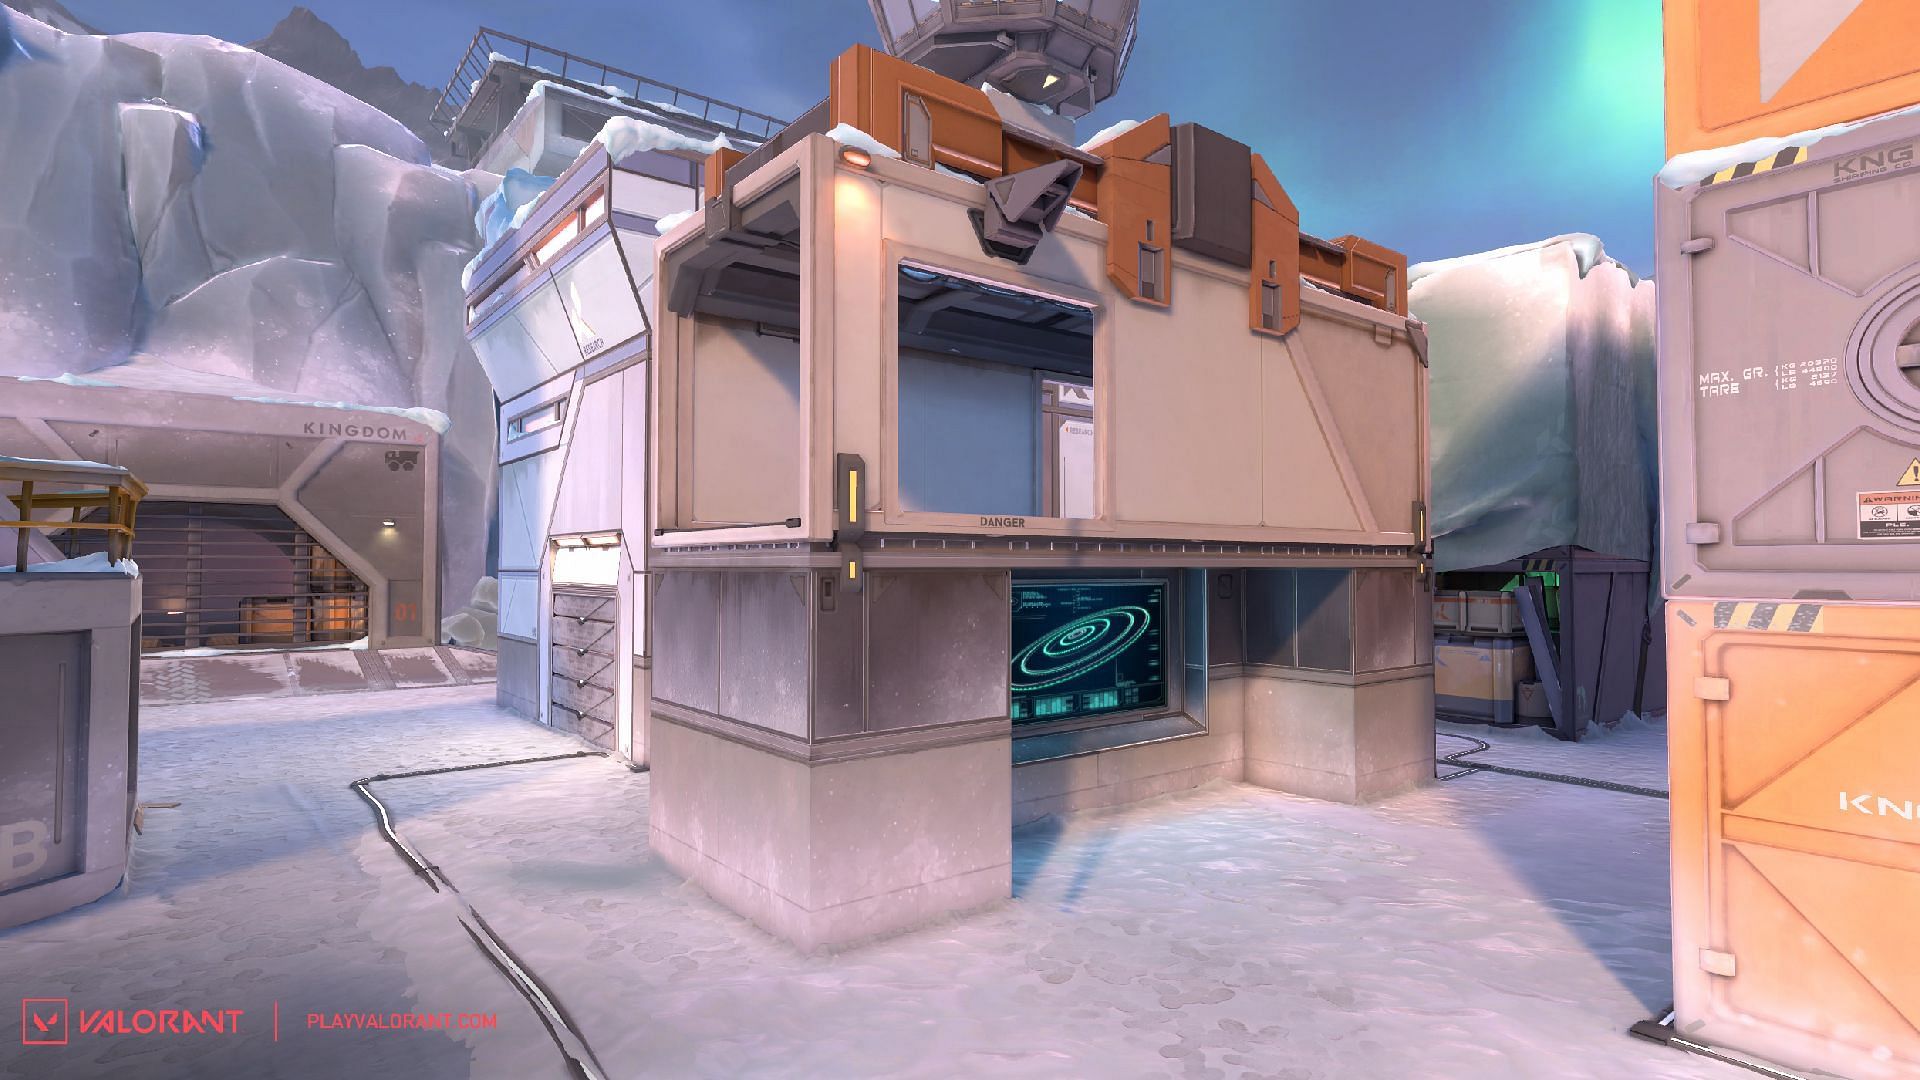 Valorant Icebox map guide: Tips and tricks, layout, callouts, and more (Image via Riot Games)